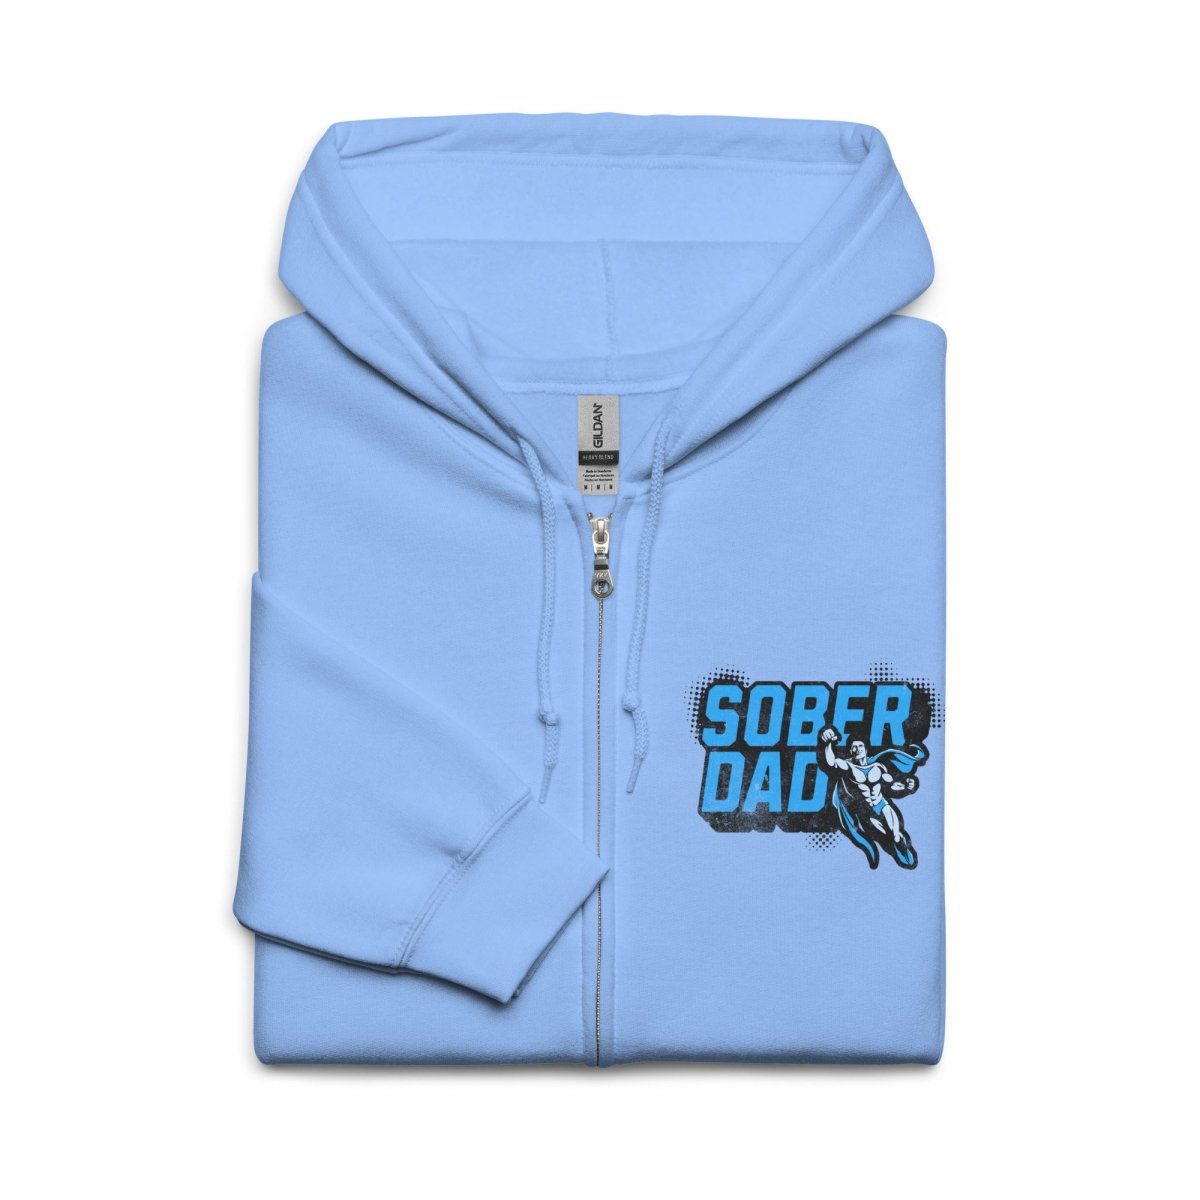 Soberdad Zip Up Hoodie: Embrace Sobriety with Fatherhood Flair - Sobervation